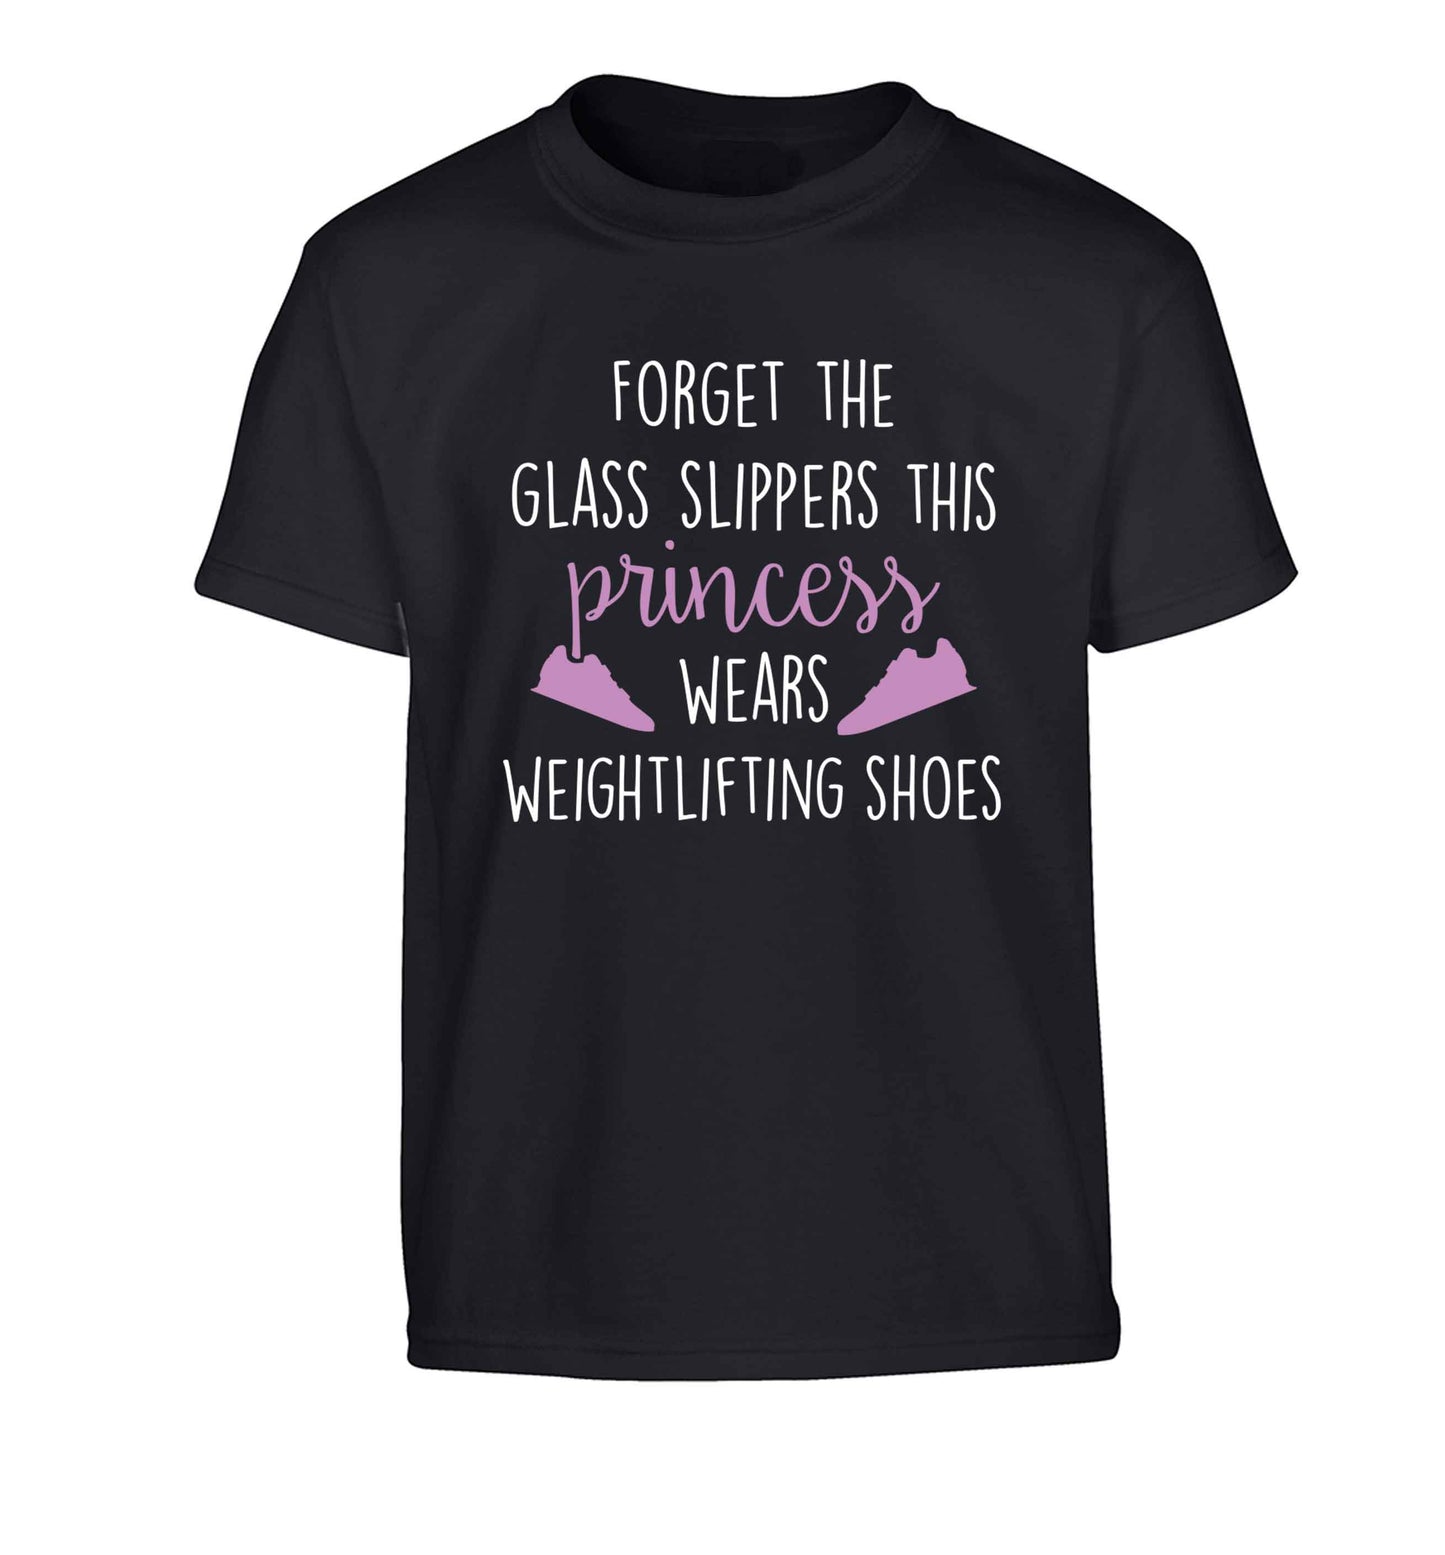 Forget the glass slippers this princess wears weightlifting shoes Children's black Tshirt 12-13 Years